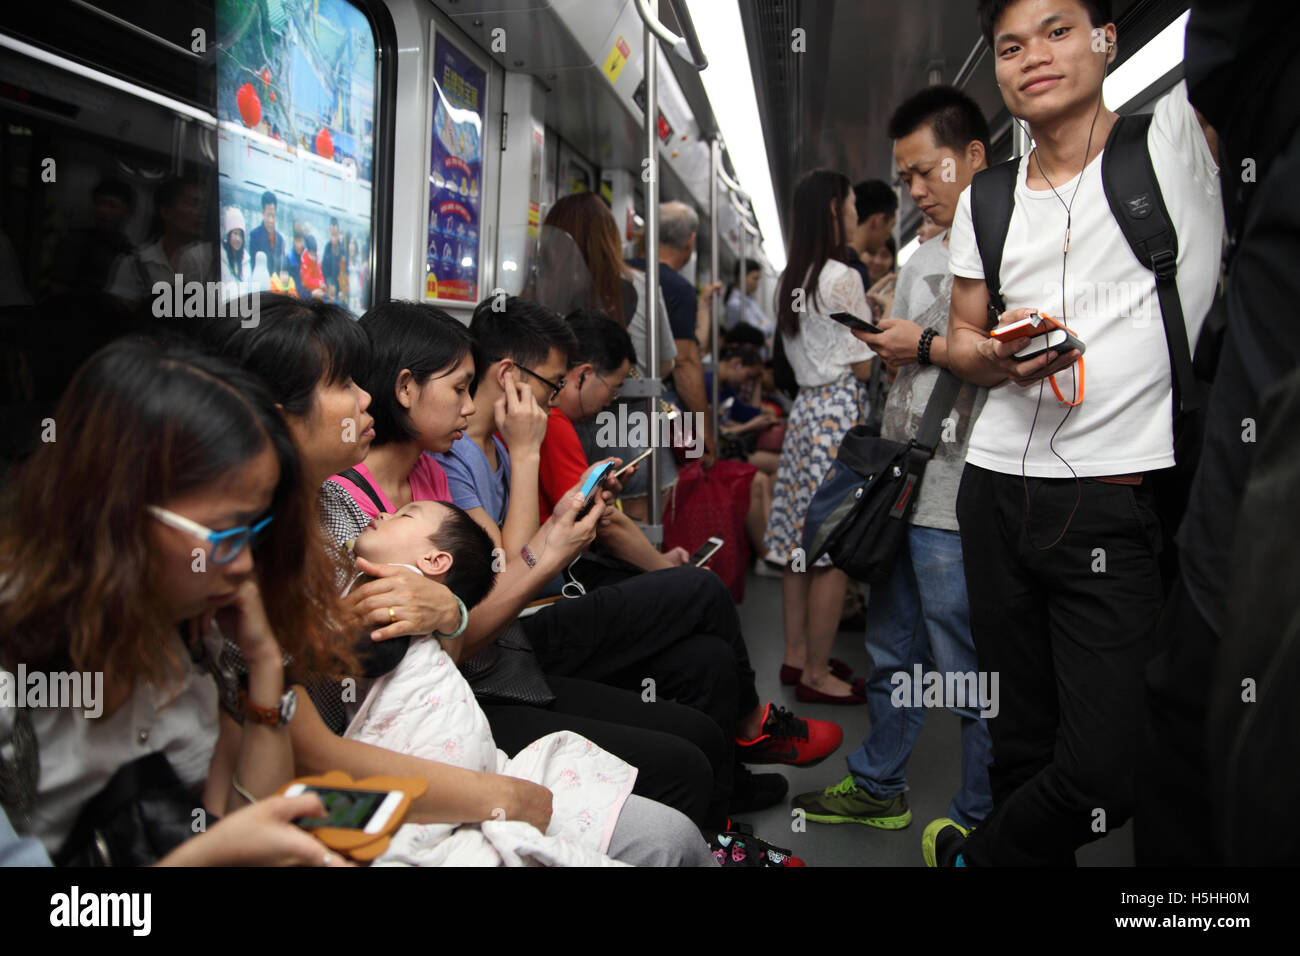 Chinese people ride the Guangzhou Metro train, lots of them play with smartphones and one mother is holding her sleeping baby. Stock Photo